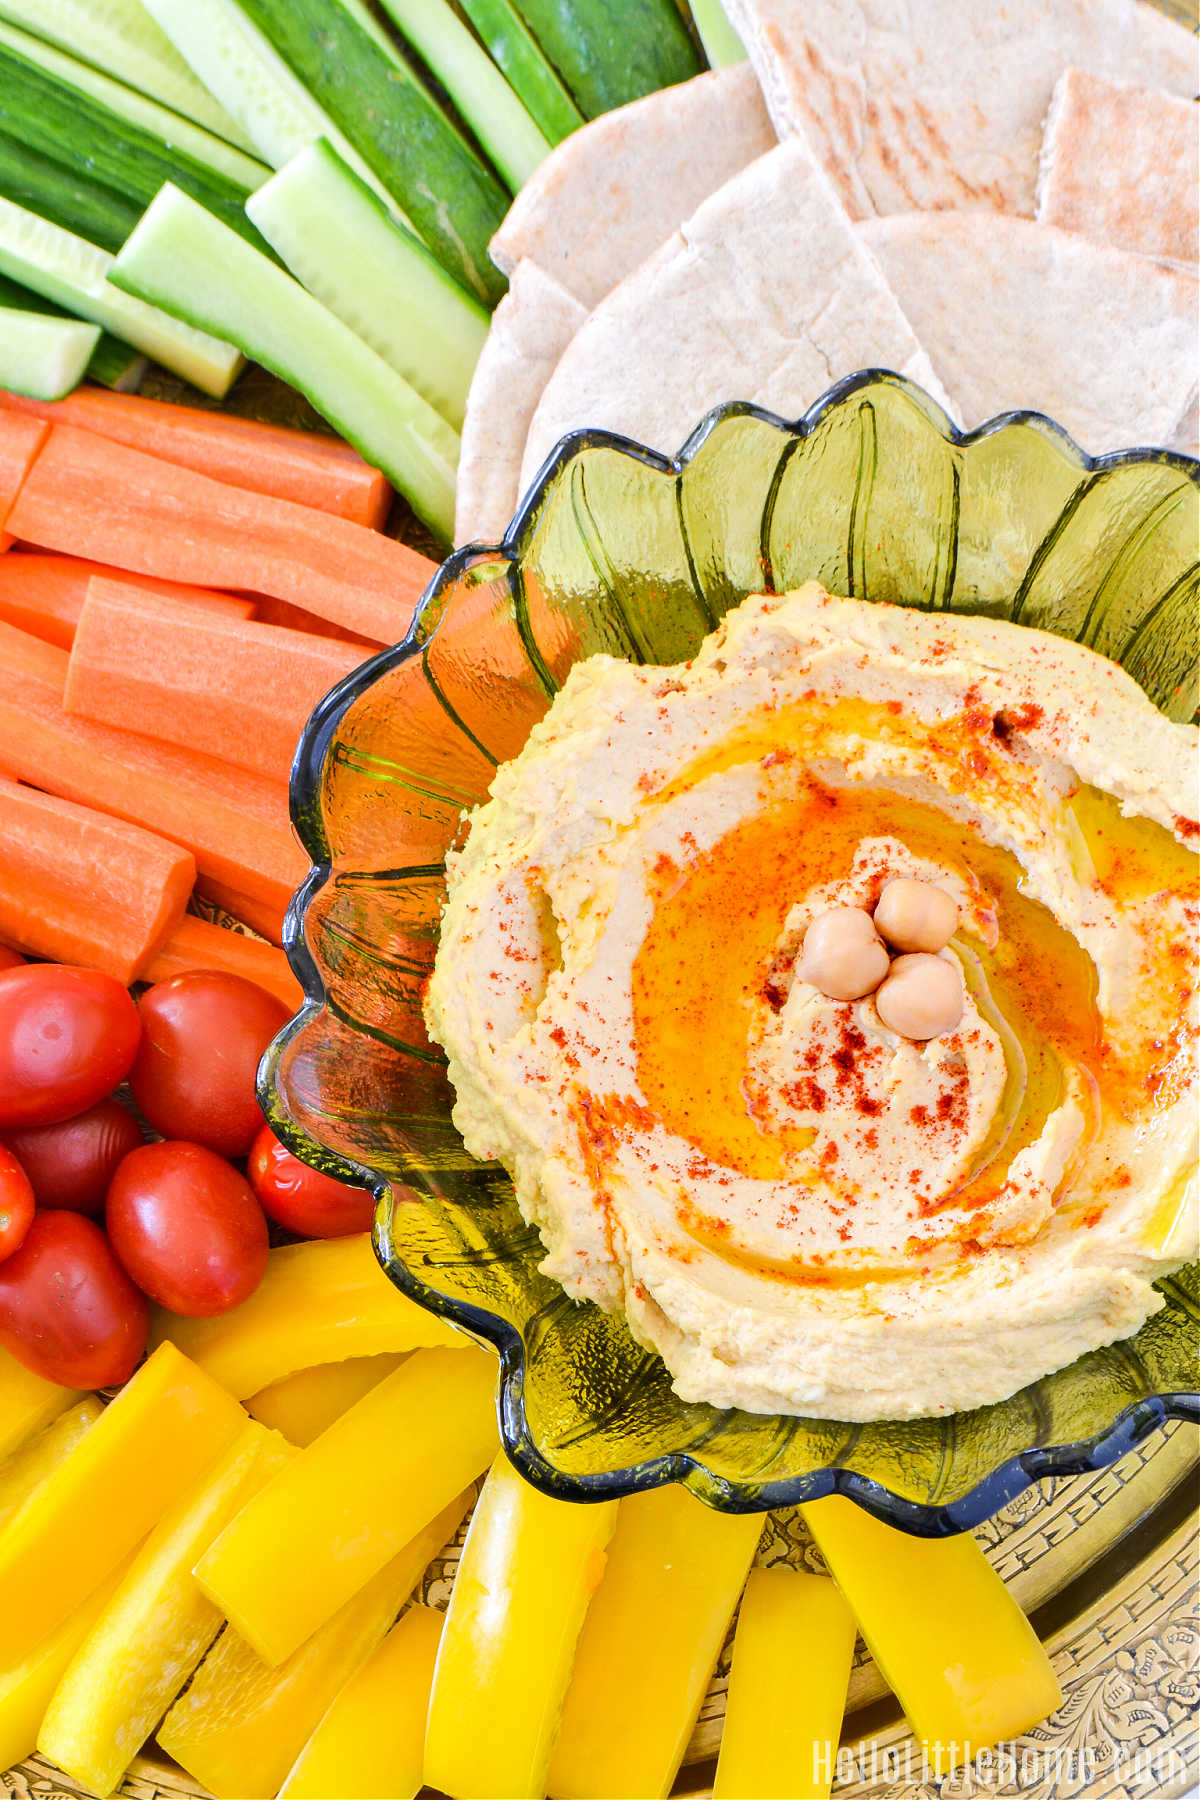 A bowl of the finished dip on a platter surrounded by veggies and pita bread.